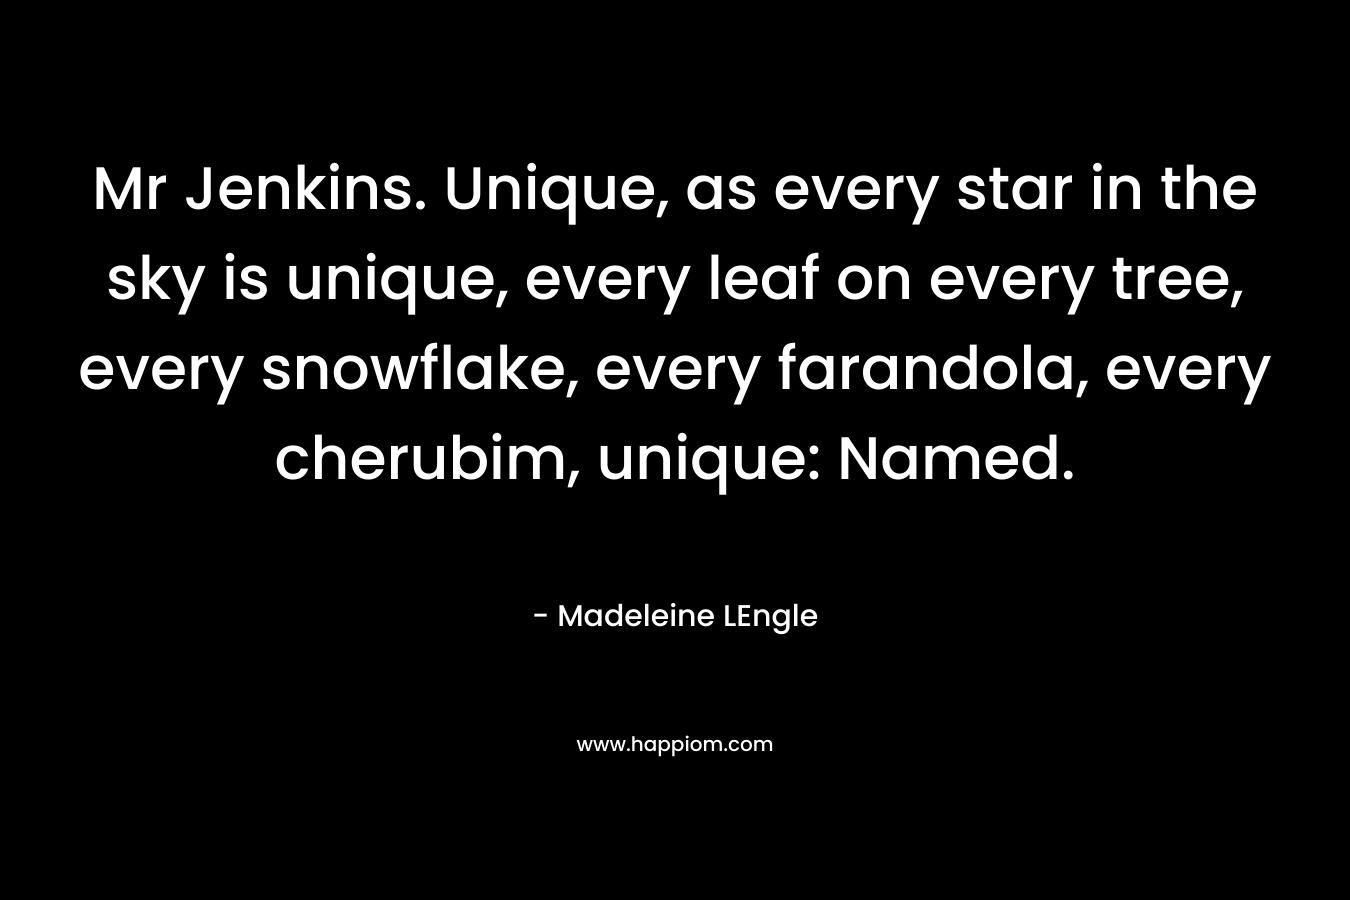 Mr Jenkins. Unique, as every star in the sky is unique, every leaf on every tree, every snowflake, every farandola, every cherubim, unique: Named.